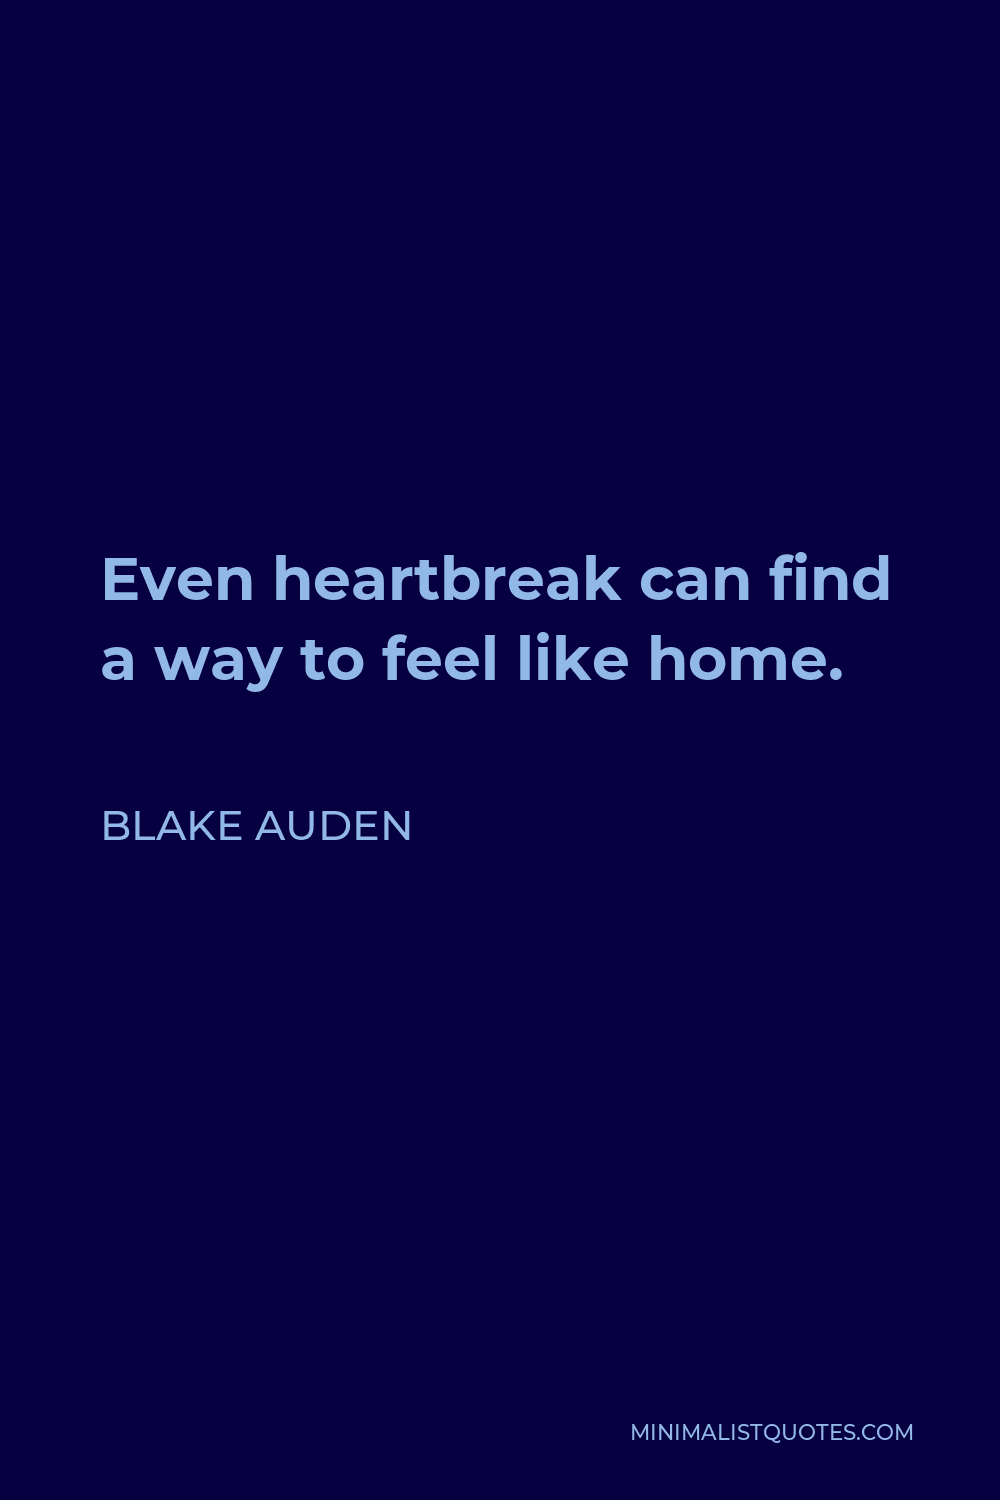 Blake Auden Quote - Even heartbreak can find a way to feel like home.